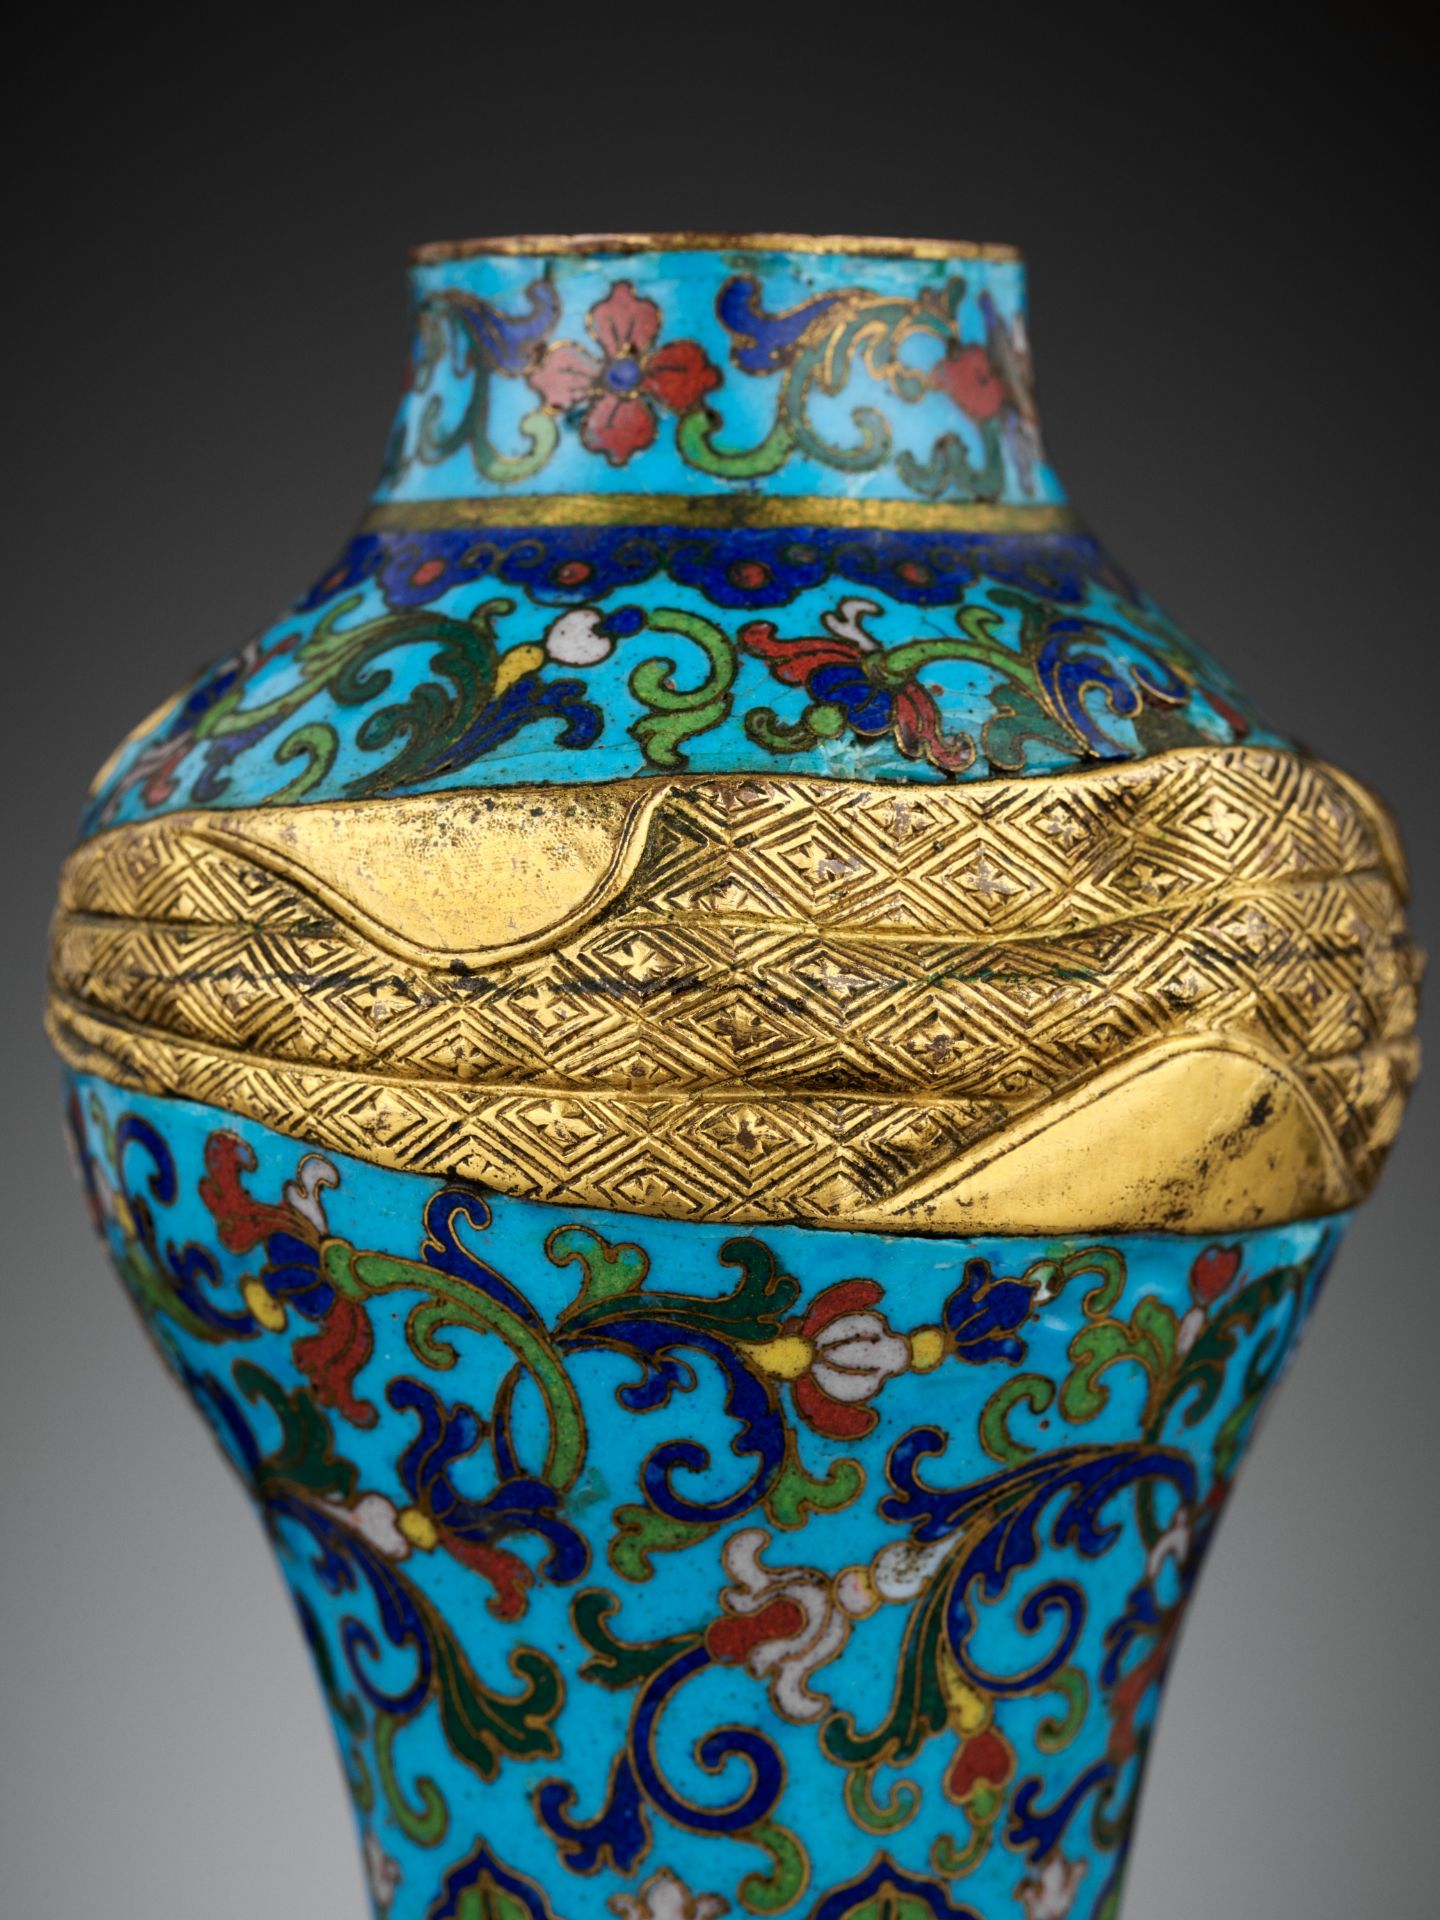 A RARE CLOISONNE ENAMEL 'SASH-TIED' BALUSTER VASE, ATTRIBUTED TO THE IMPERIAL WORKSHOPS, QIANLONG - Image 10 of 10